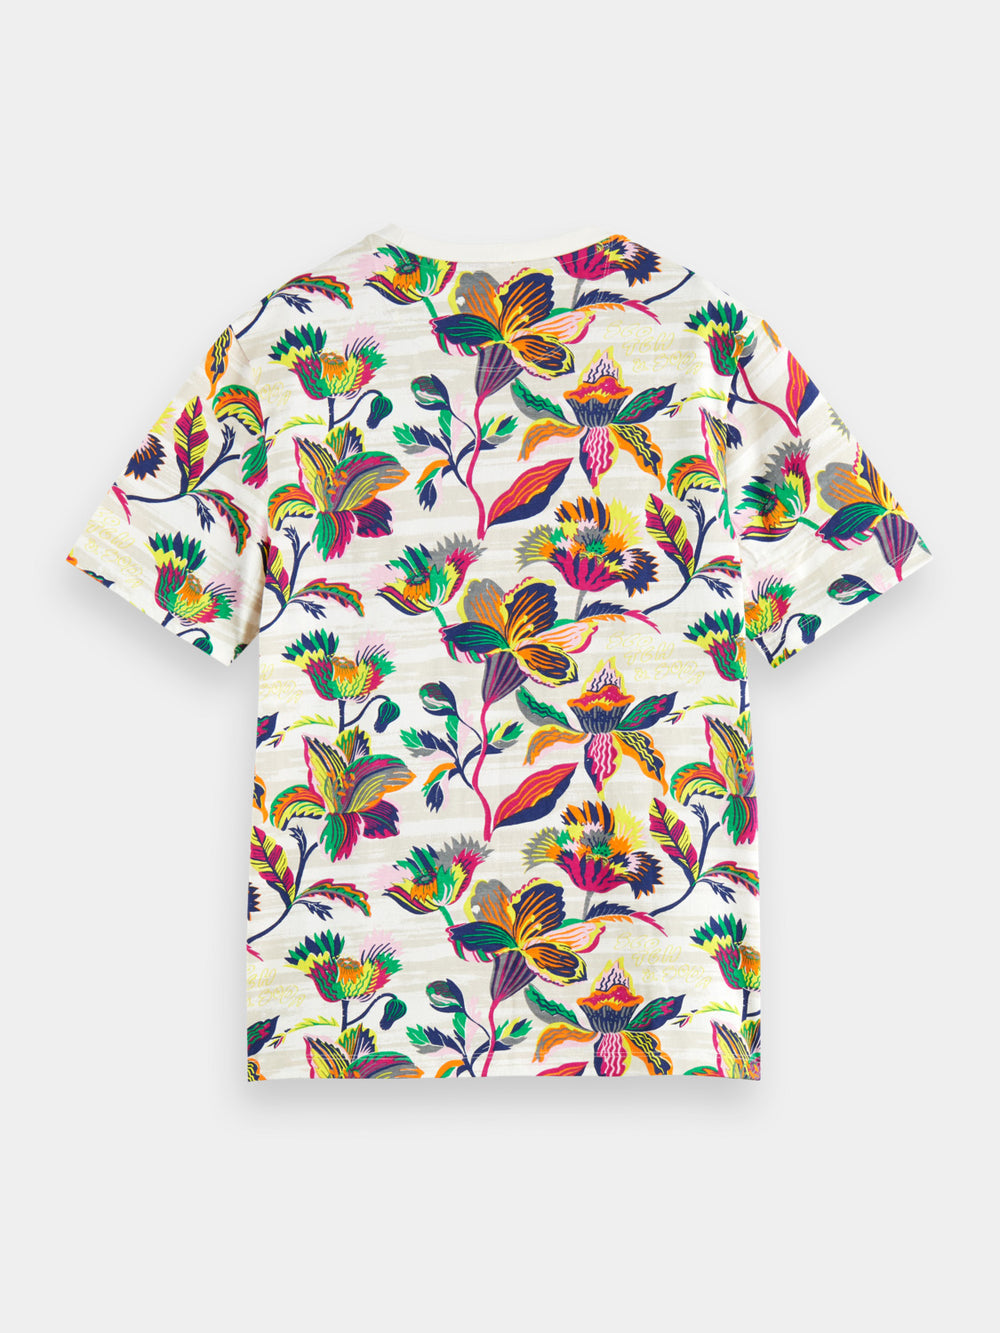 Relaxed-fit printed t-shirt - Scotch & Soda NZ